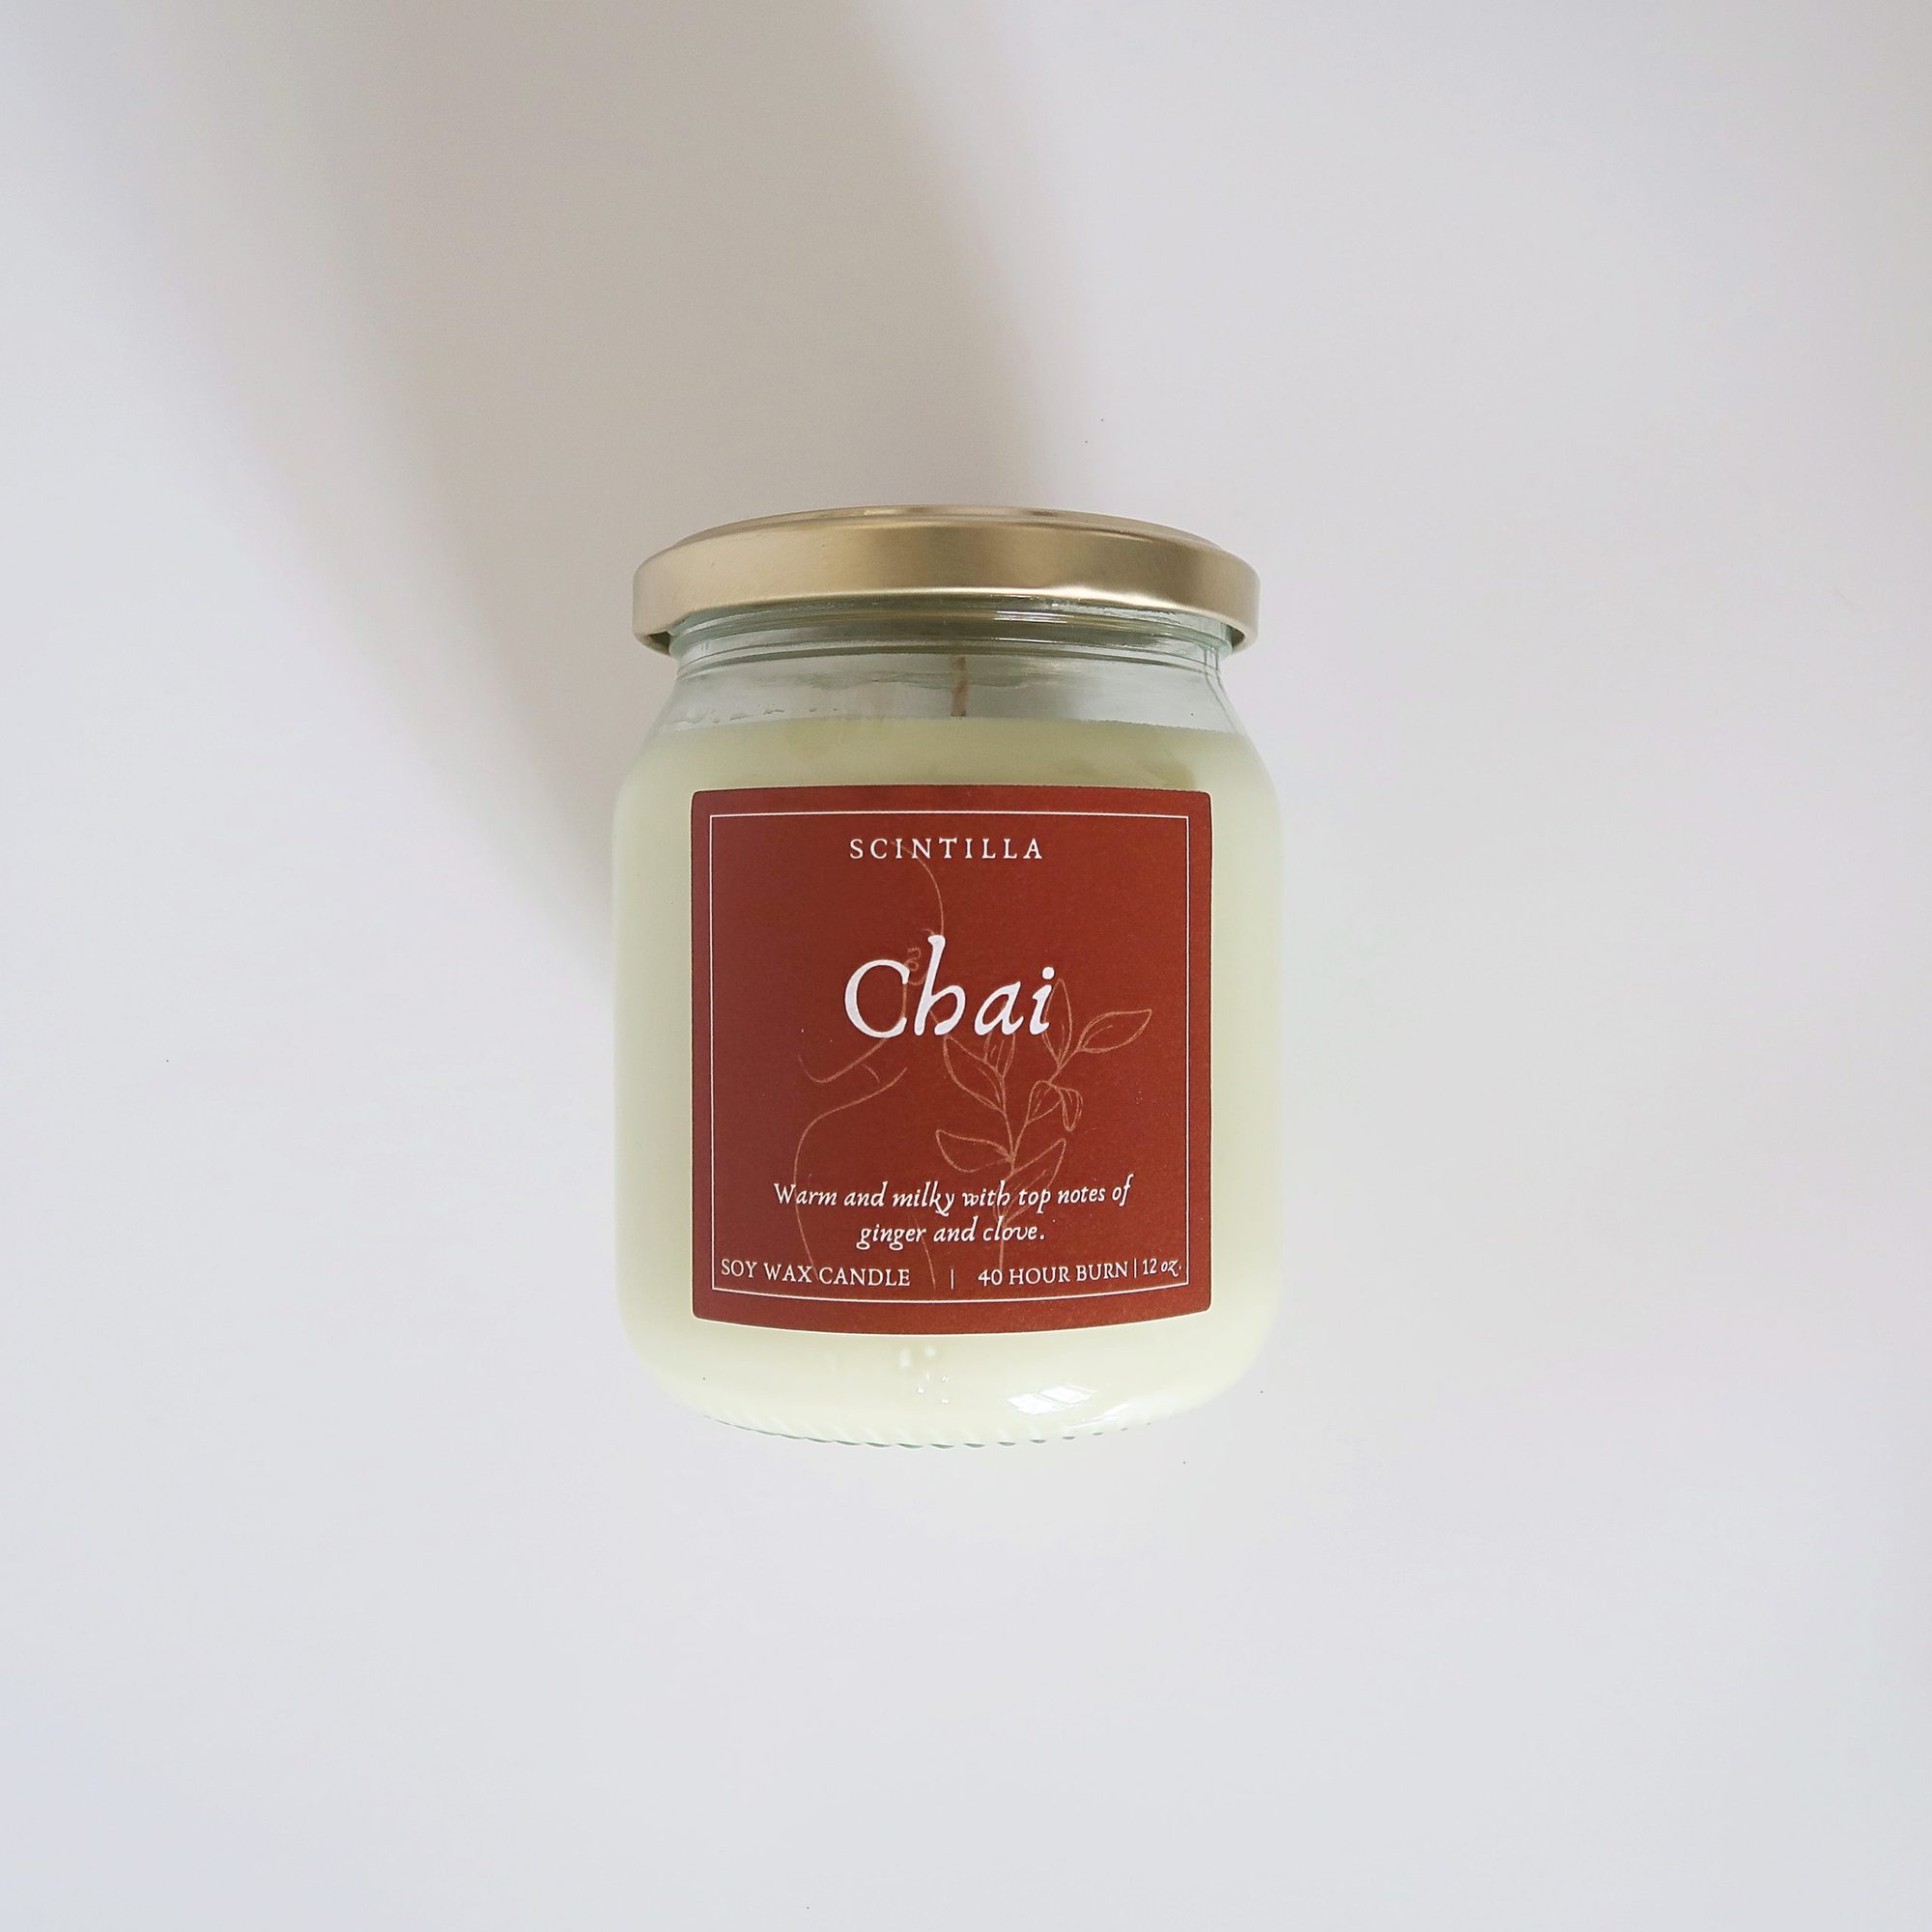 Chai Natural Candle